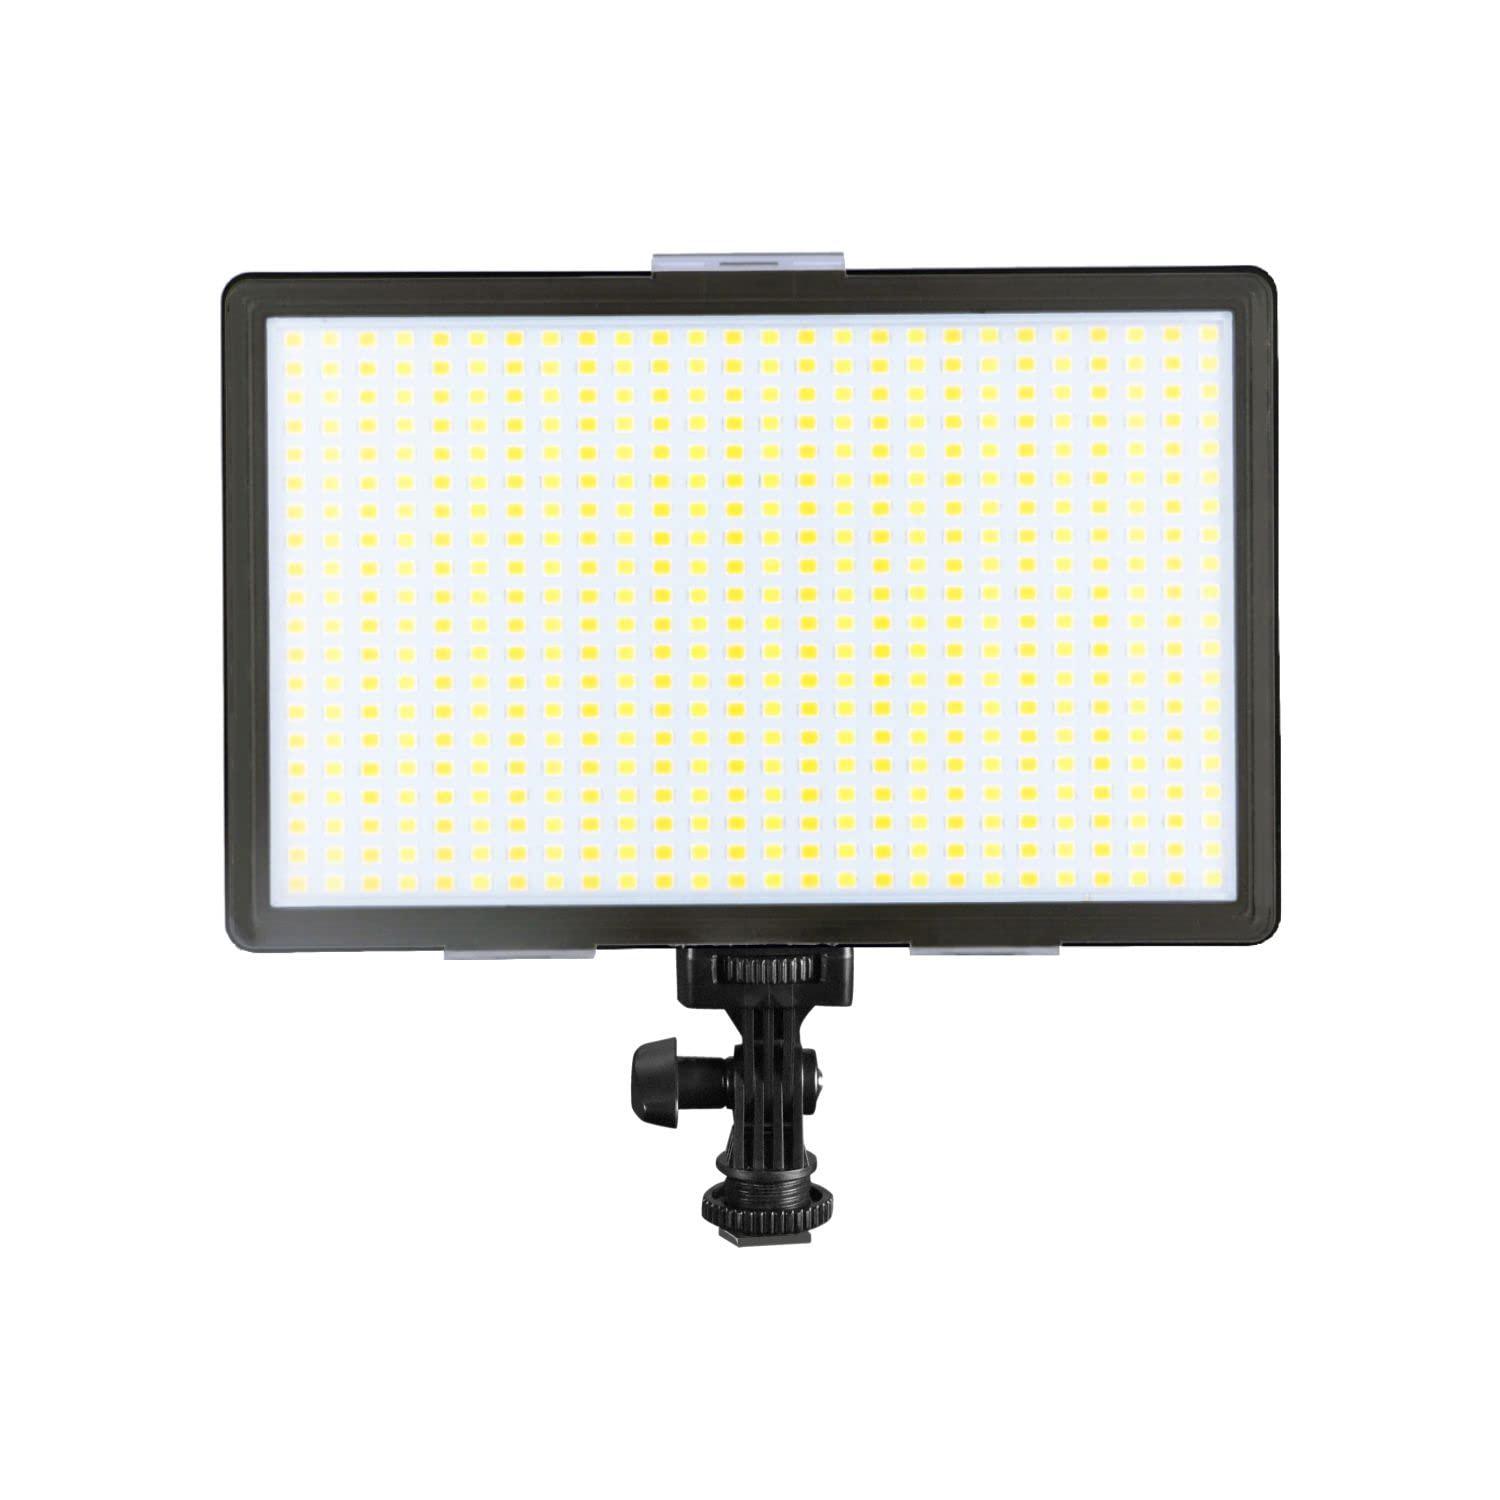 Digitek (LED-D520 WB) Professional LED 37W Video Light Compatible with Tripods, Monopods, Cameras, Table Stand & Camcorder, for YouTube Video, Product Photography, Makeup Shoot Proudly Make in India - Digitek